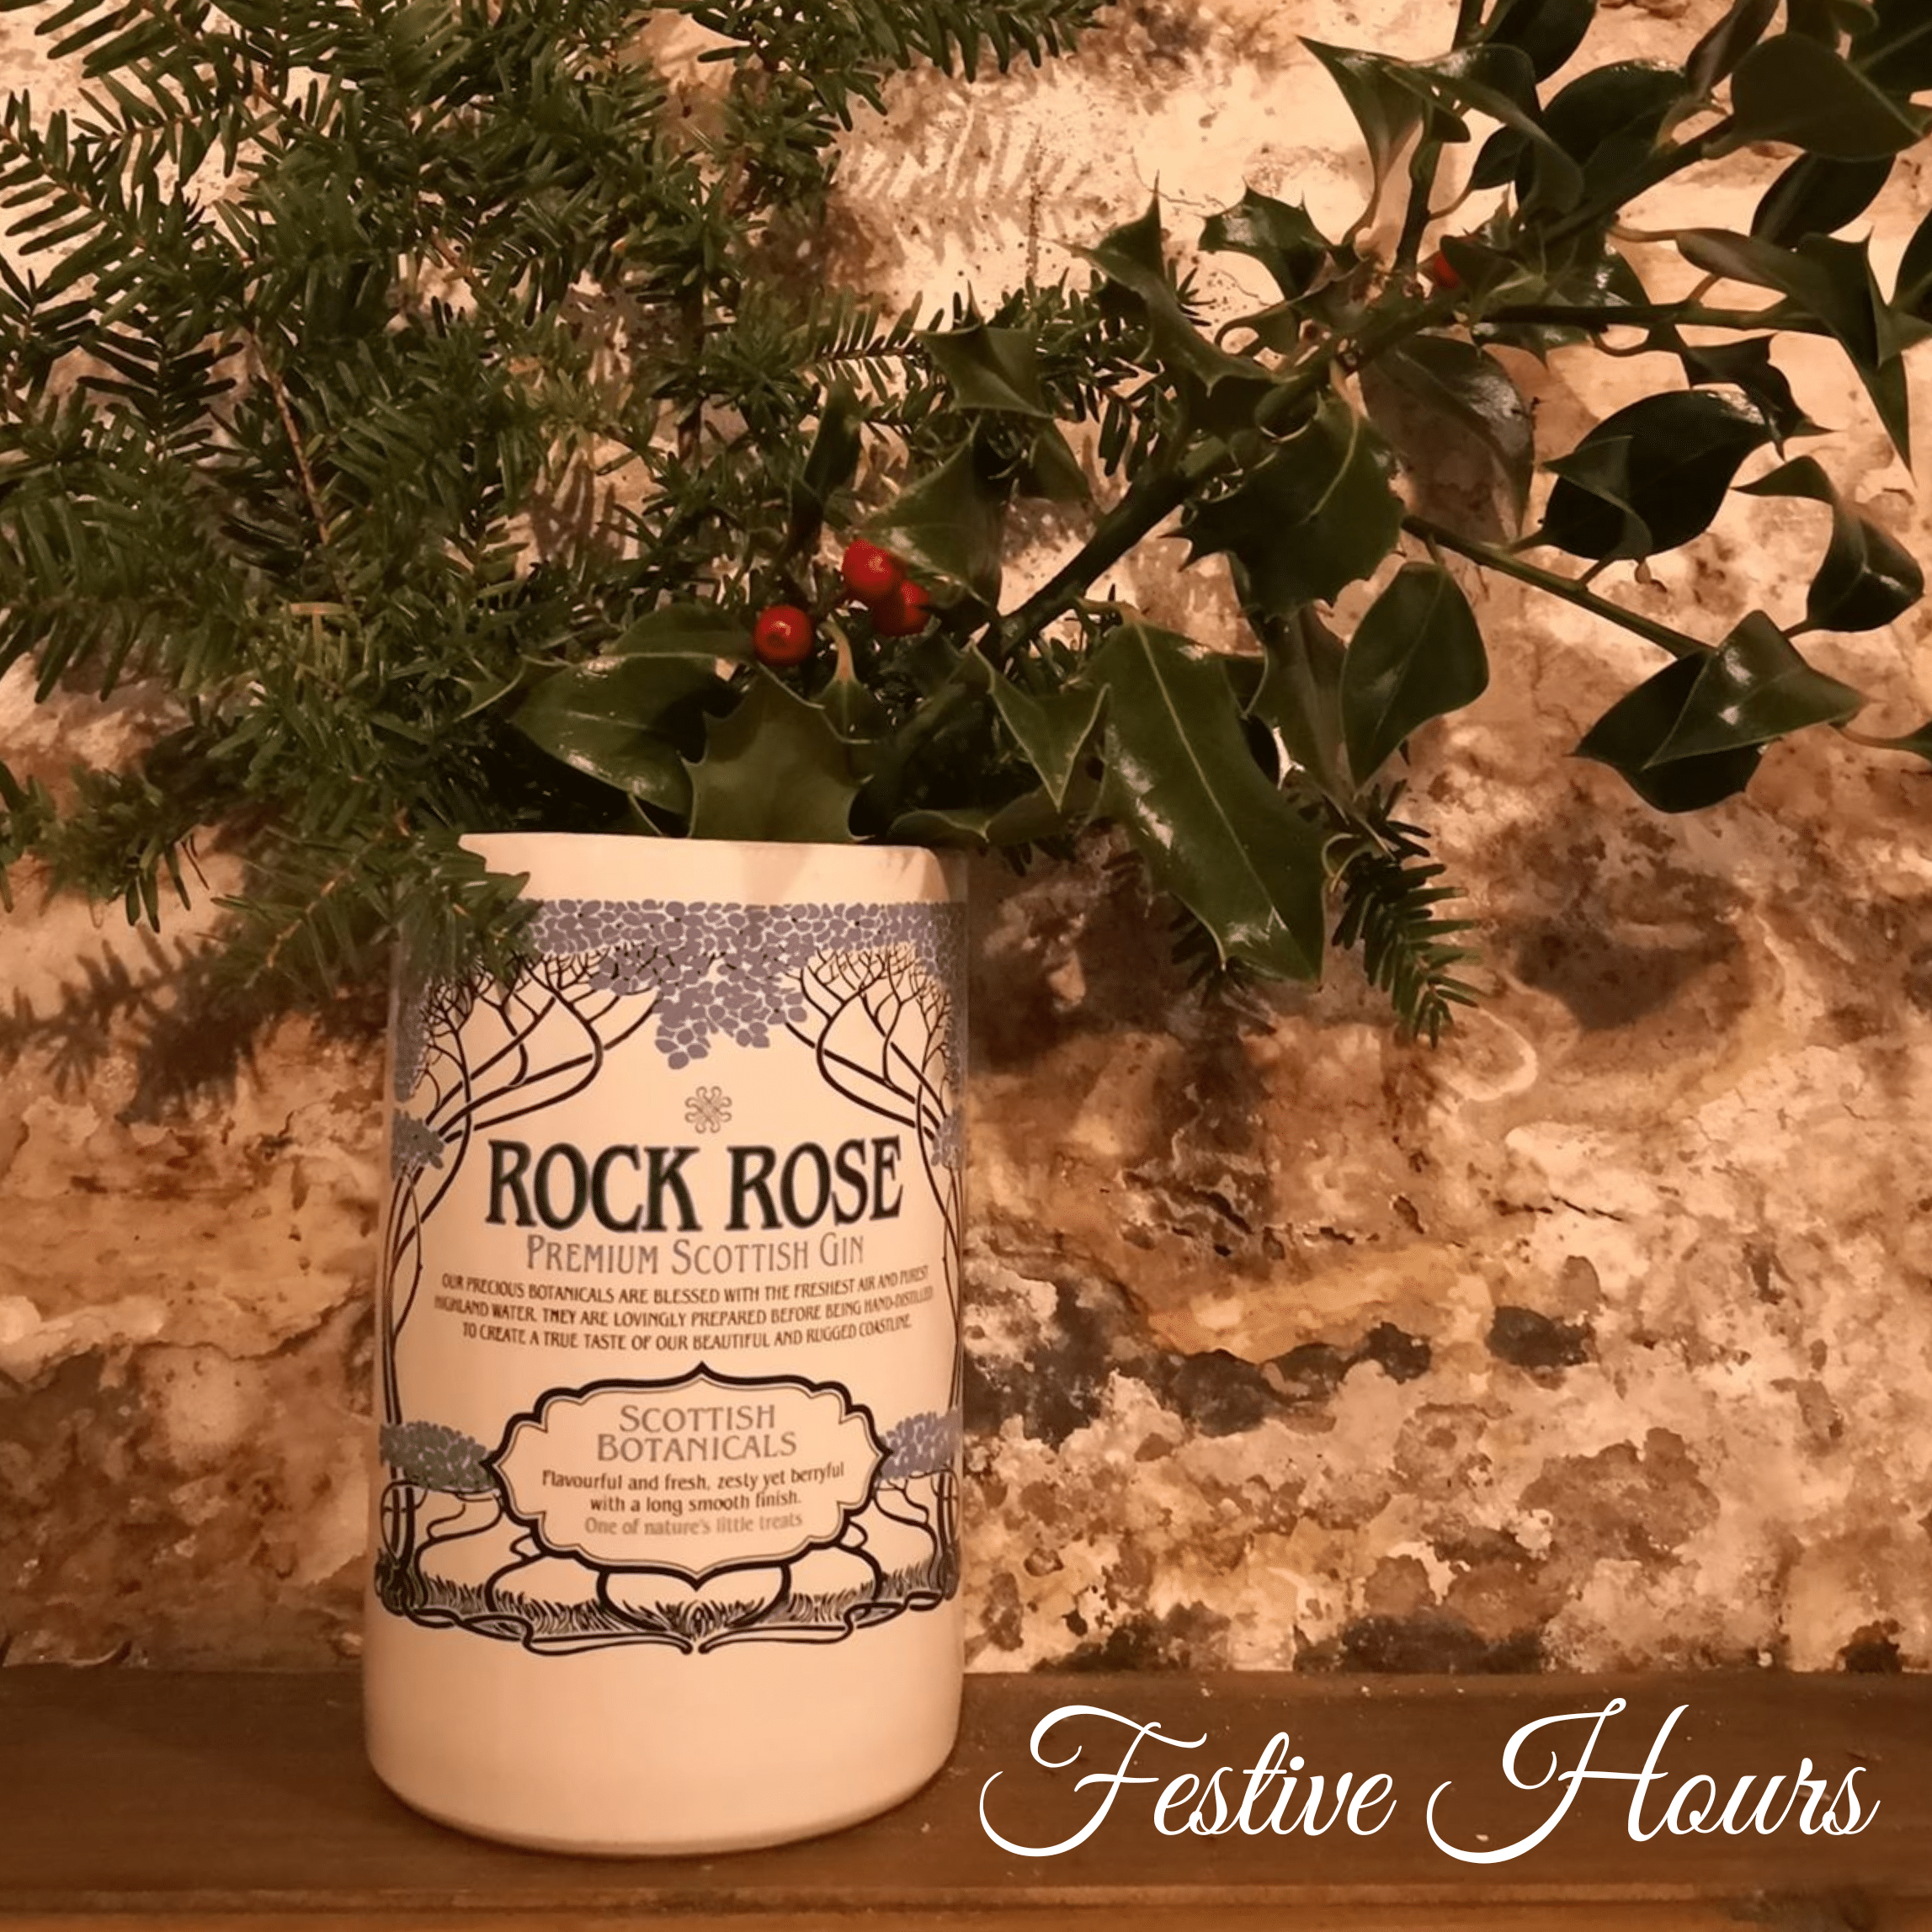 Festive picture with a Rock Rose Gin bottle cut horizontally to make a flower pot and filled with pine tree and holly branches